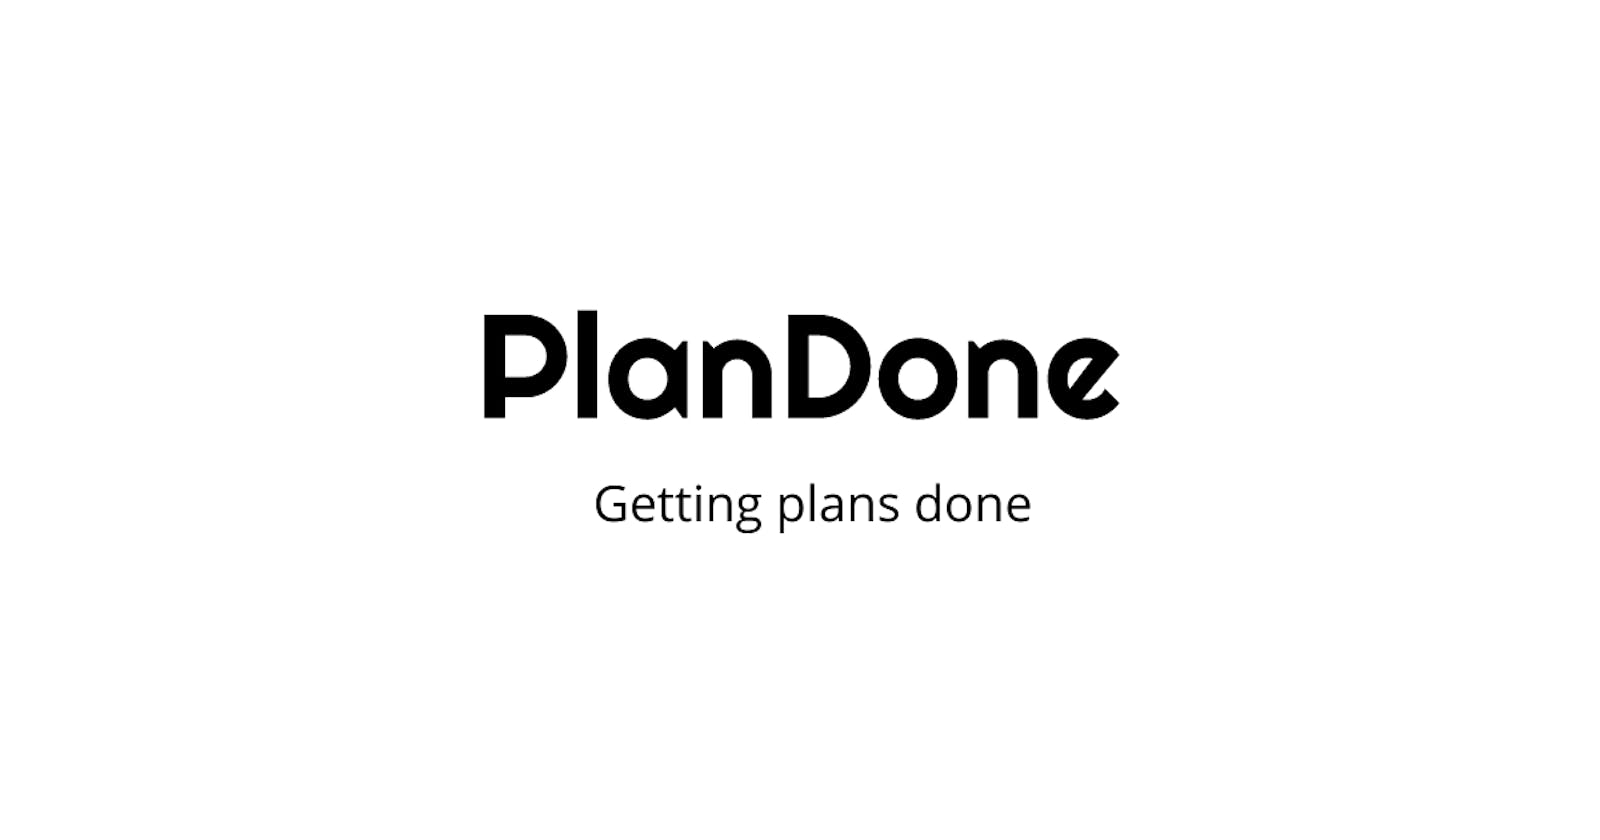 Introducing PlanDone - Getting plans done